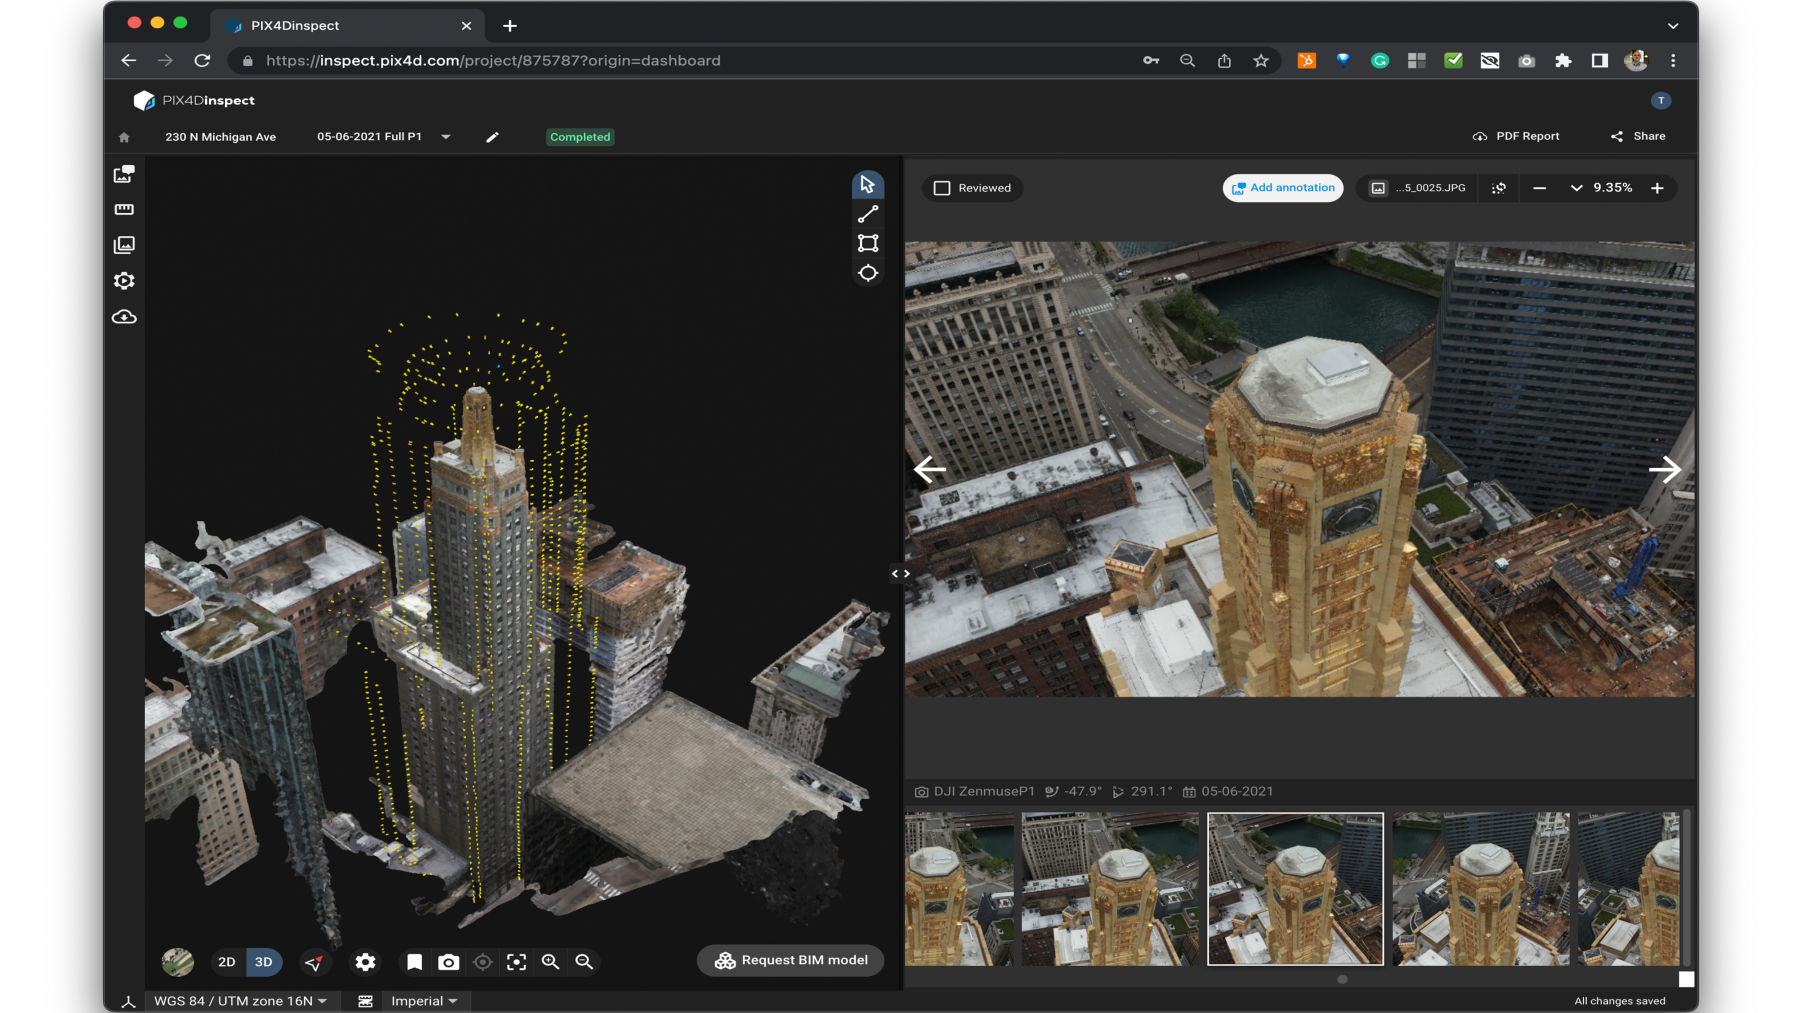 Inspecting high-rise buildings with drones | Pix4D